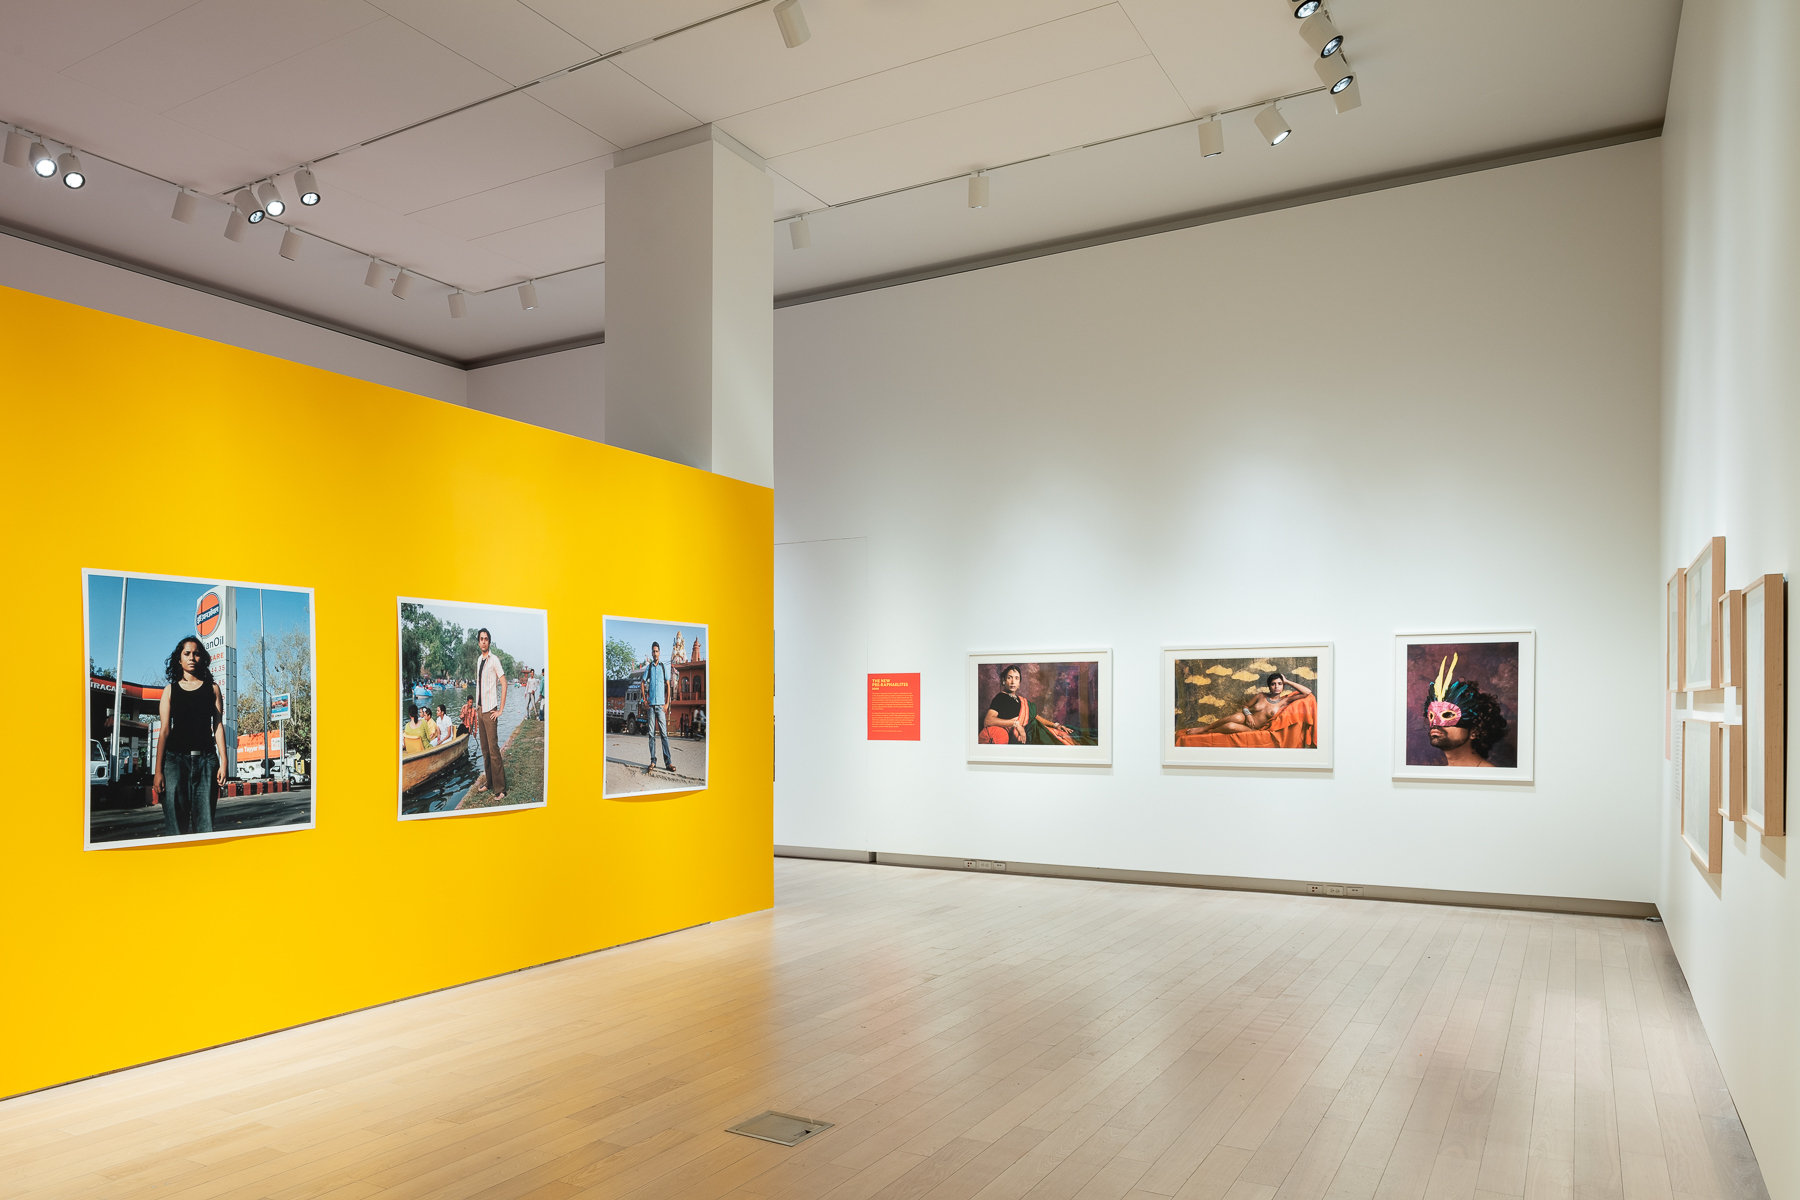     Sunil Gupta, From Here to Eternity: Sunil Gupta, A Retrospective, installation view, Ryerson Image Centre Gallery, 2022. Courtesy of the artist and the RIC

